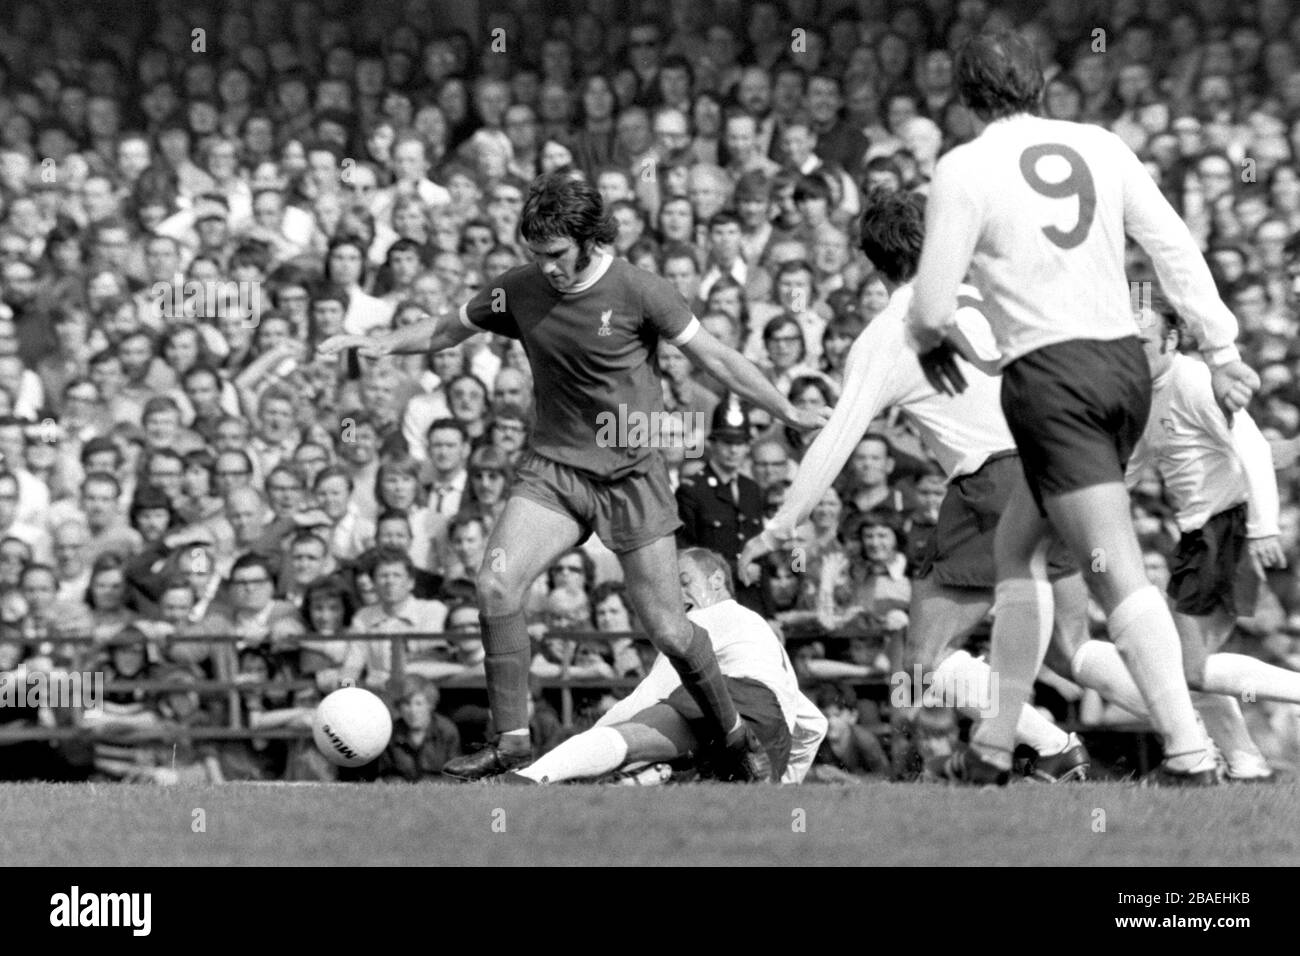 (L-R) Liverpool's Larry Lloyd beats Derby County's John McGovern to the ball, watched by Derby's Kevin Hector, John O'Hare and Archie Gemmill Stock Photo